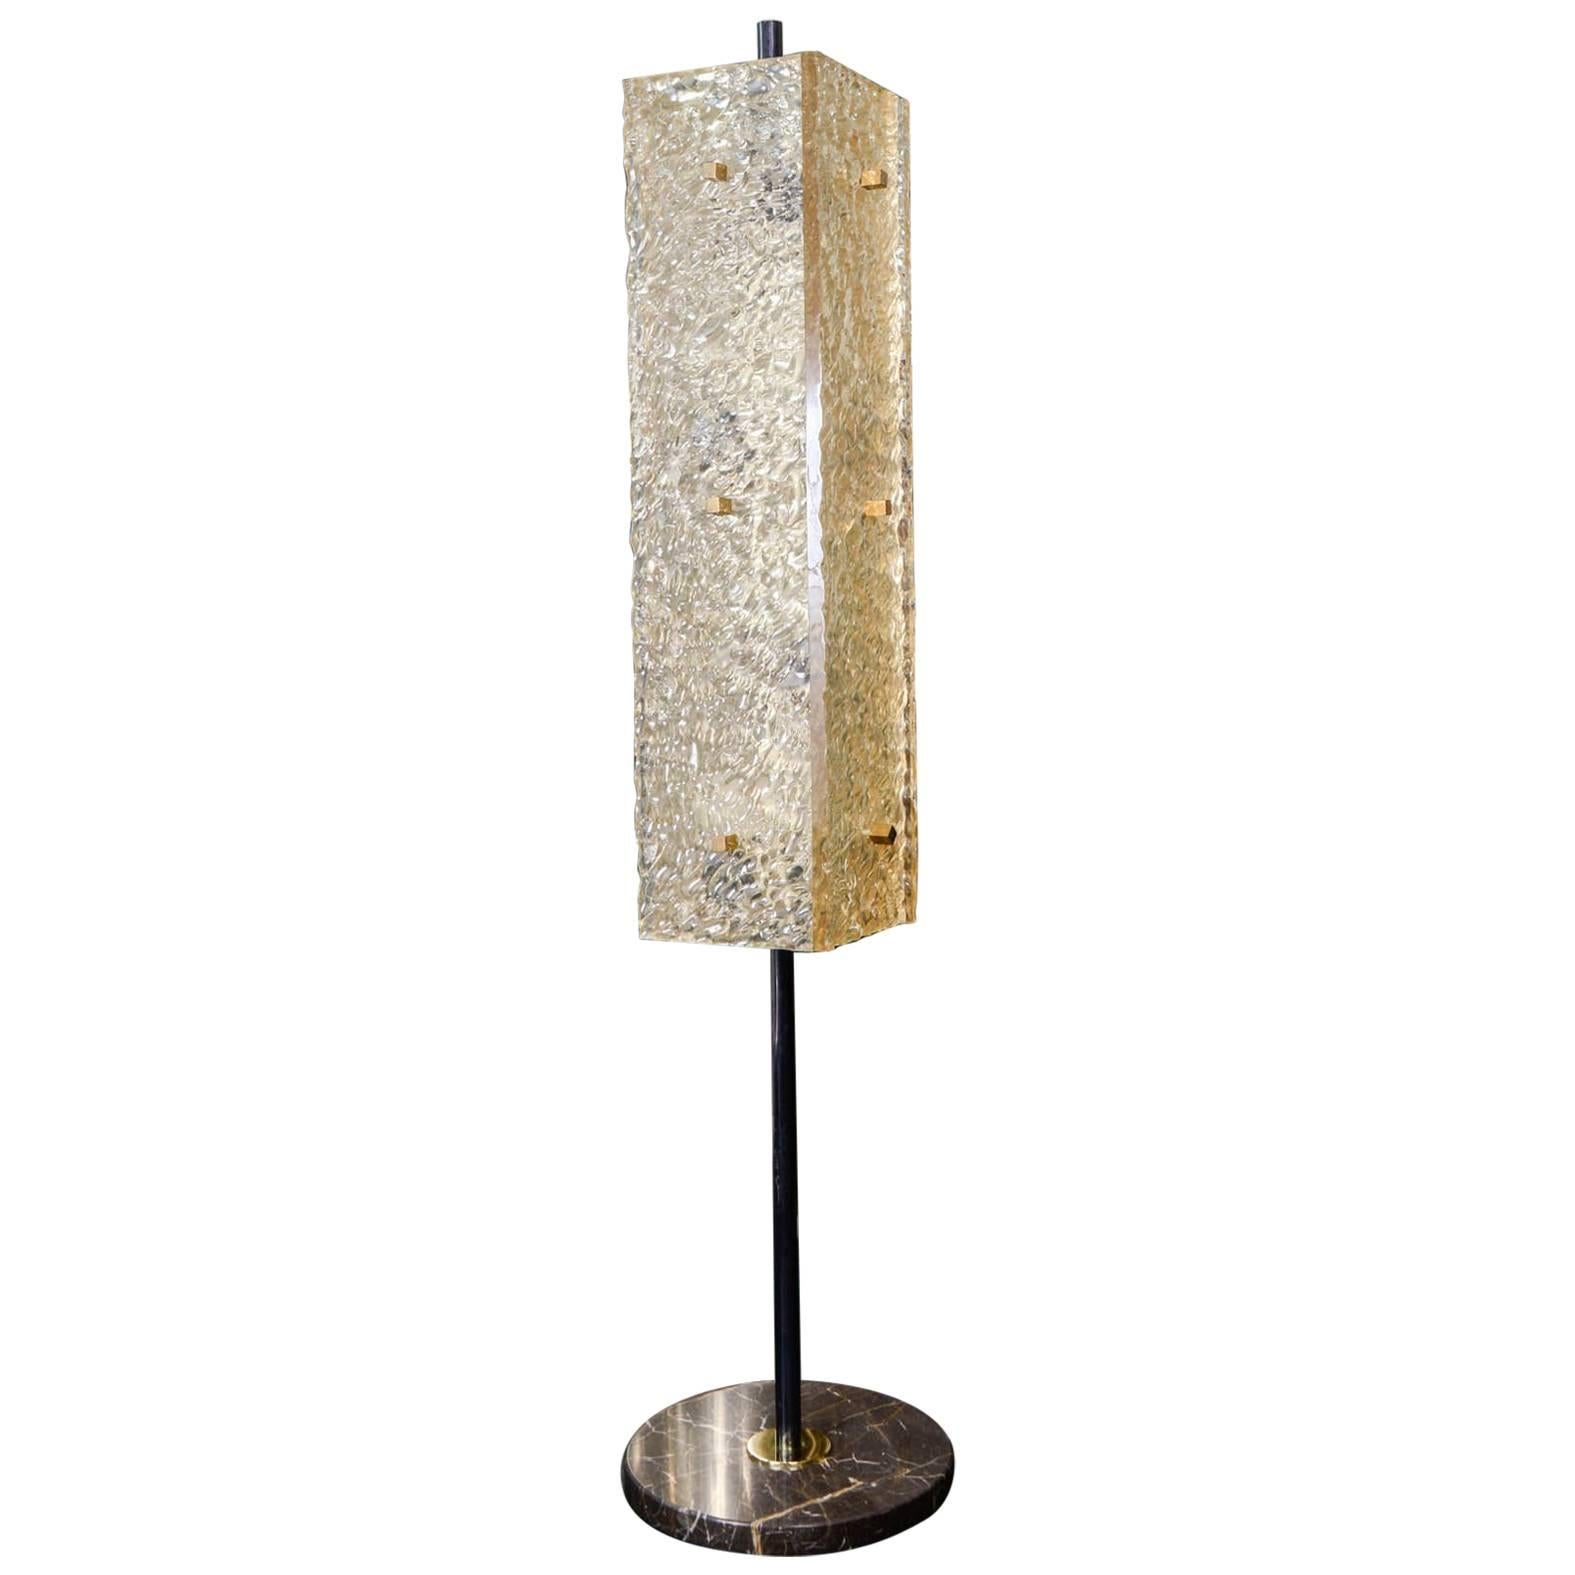 Fantastic Floor Lamp by Areluce